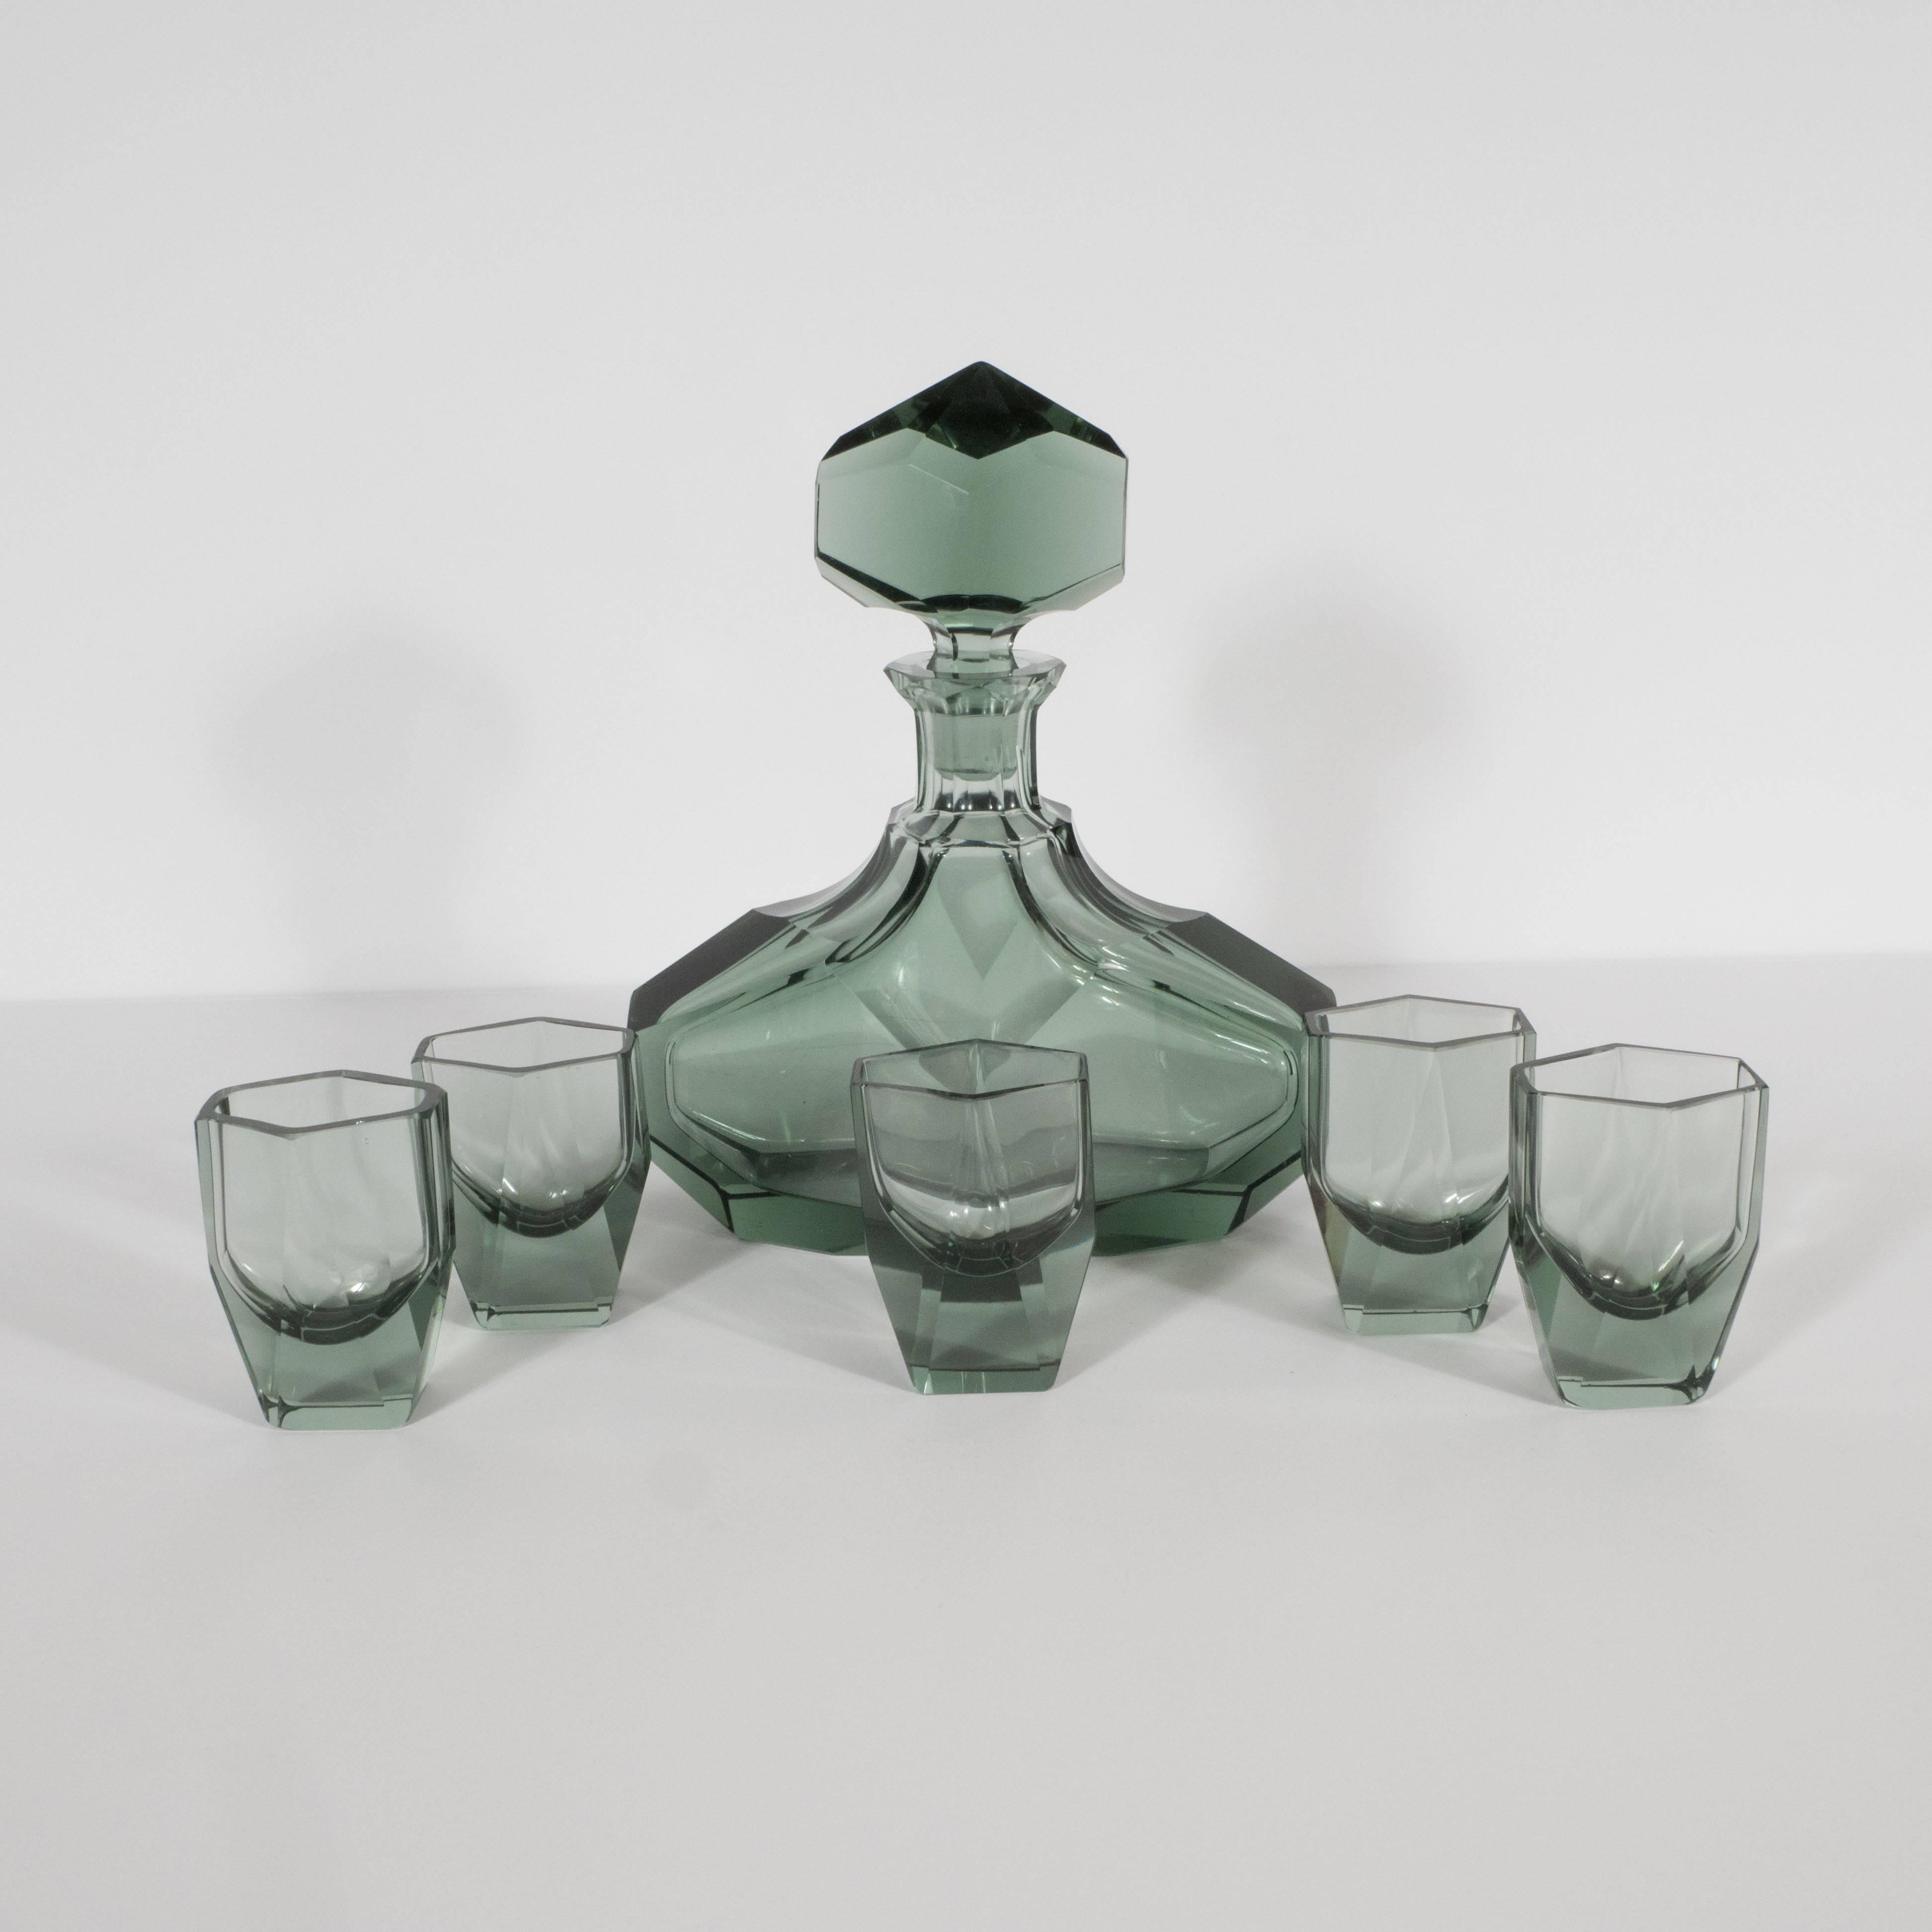 This elegant Art Deco bar set, realized in France, circa 1930, features a decanter and four hexagonal shot glasses in a smoked Alexandrite hue (a dark blue-green). All of the pieces feature beveled sides creating a wealth of geometric forms within.